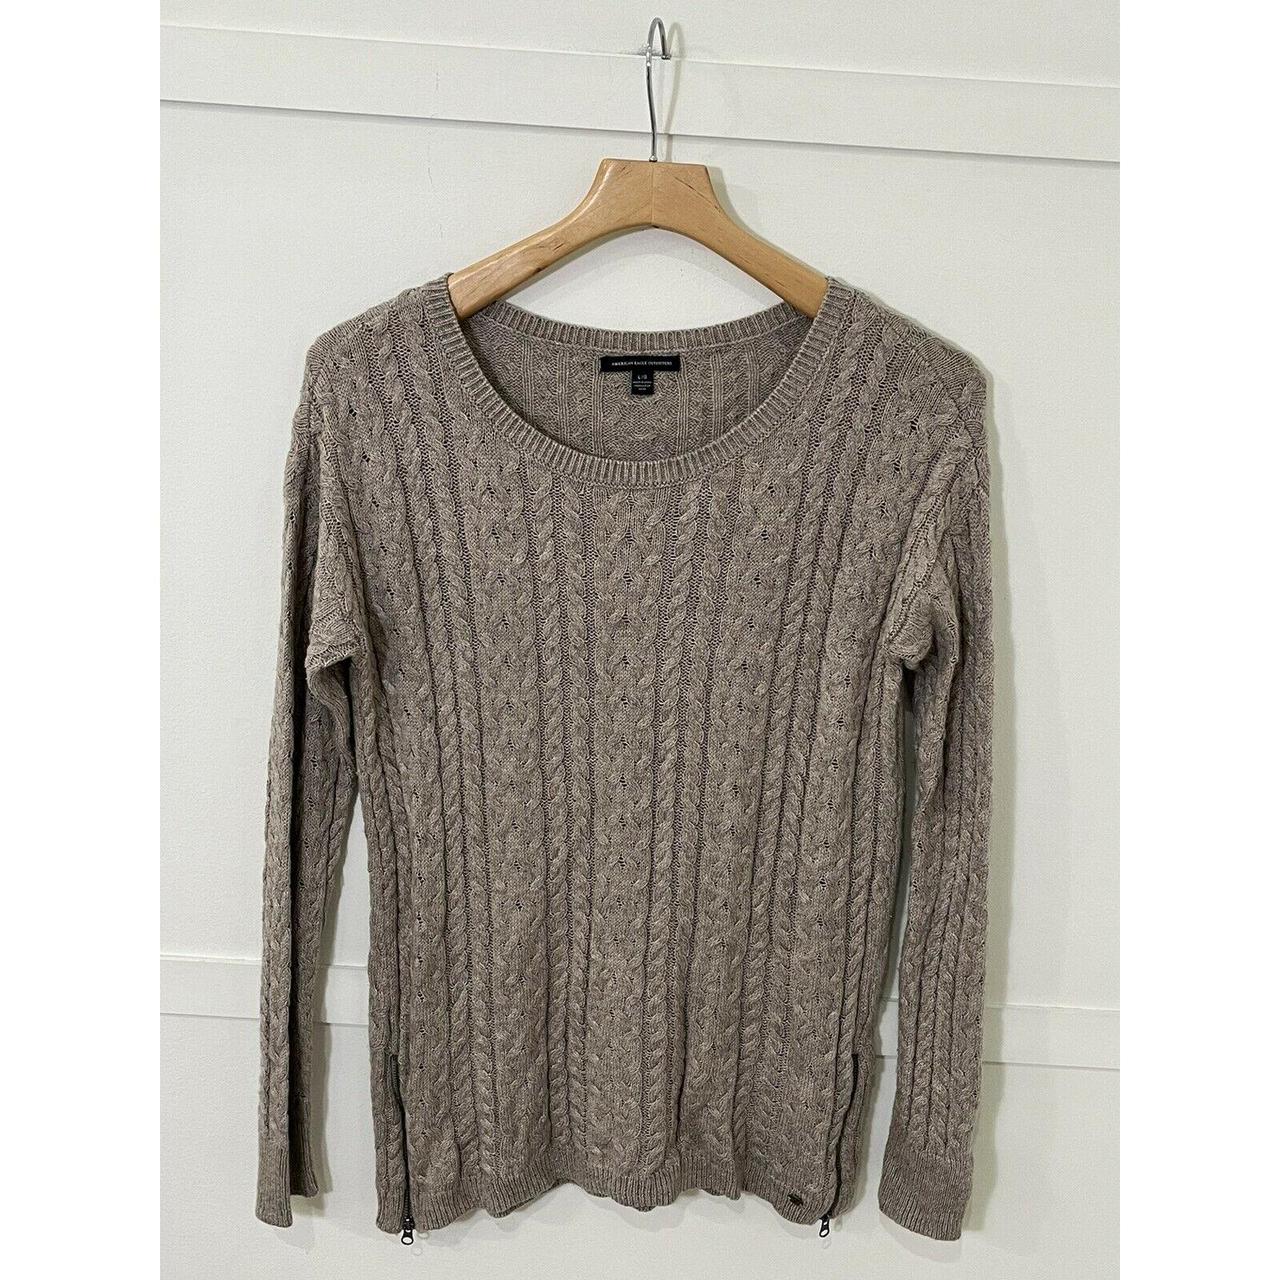 Product Image 1 - Womens American Eagle Sweater Sz